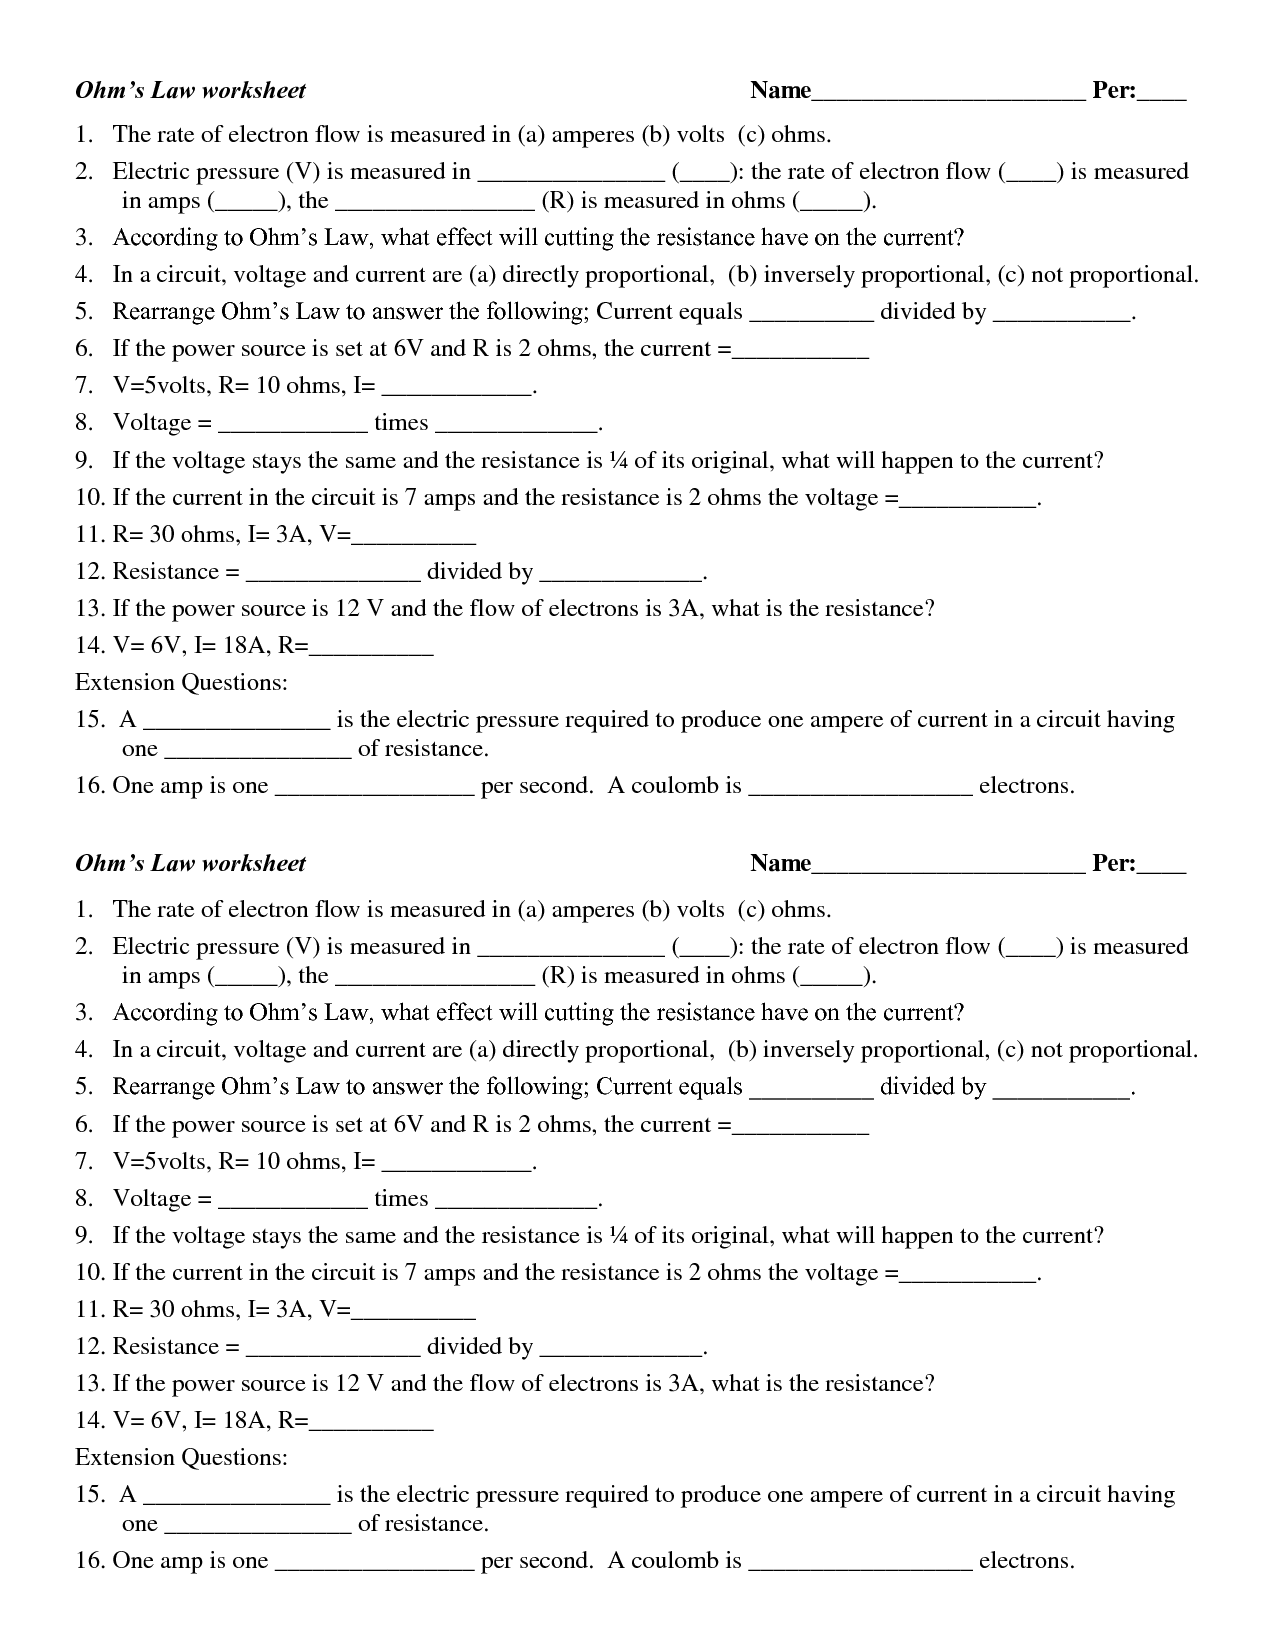 ohms-law-worksheet-answers-tutore-org-master-of-documents